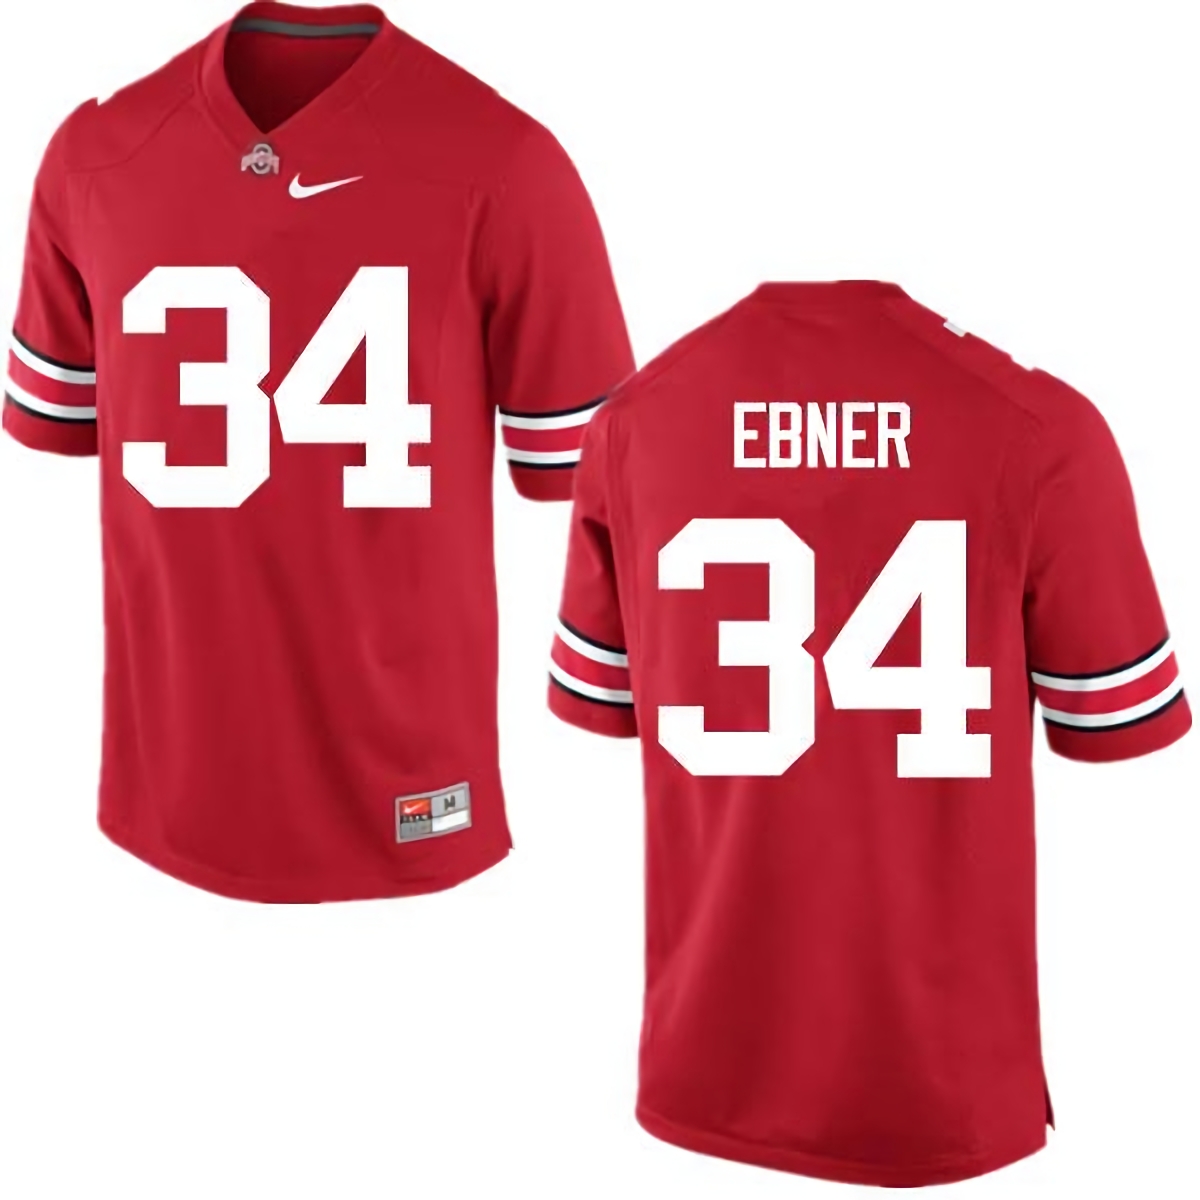 Nate Ebner Ohio State Buckeyes Men's NCAA #34 Nike Red College Stitched Football Jersey CSX4056FV